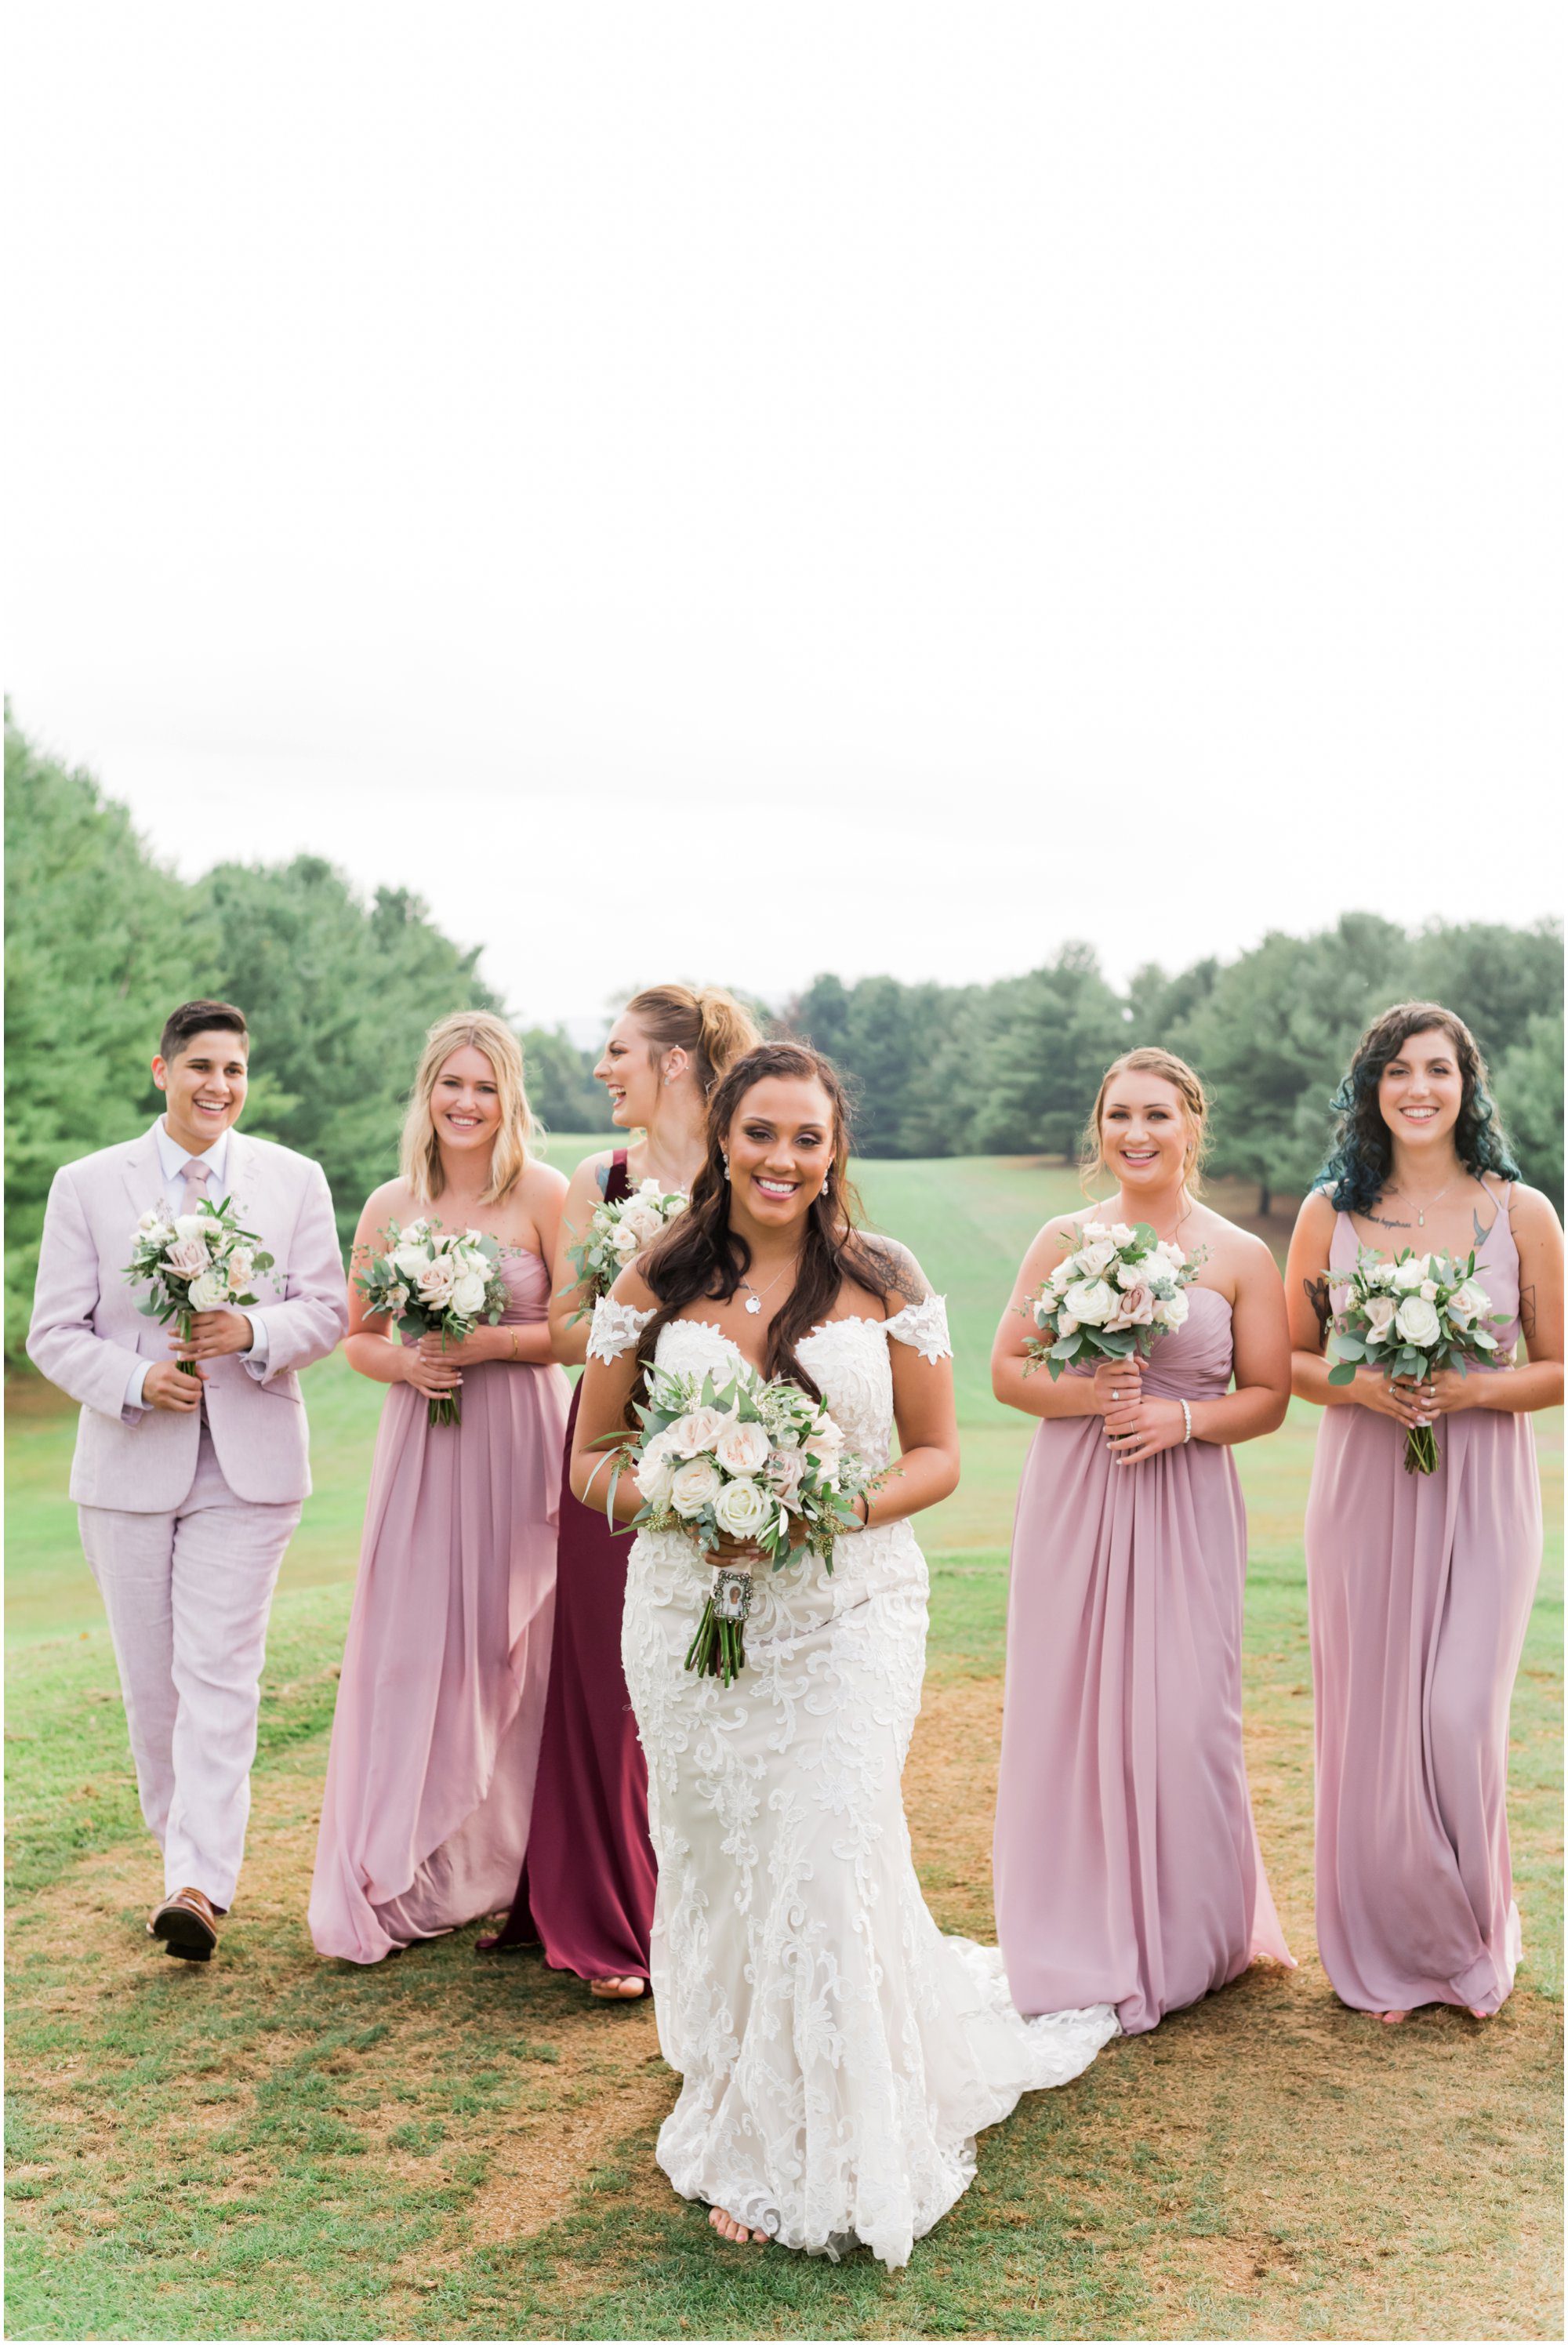 Aireannah & Marquis Bowling Green Country Club Front Royal Franzi Lee Photography-3372.jpg